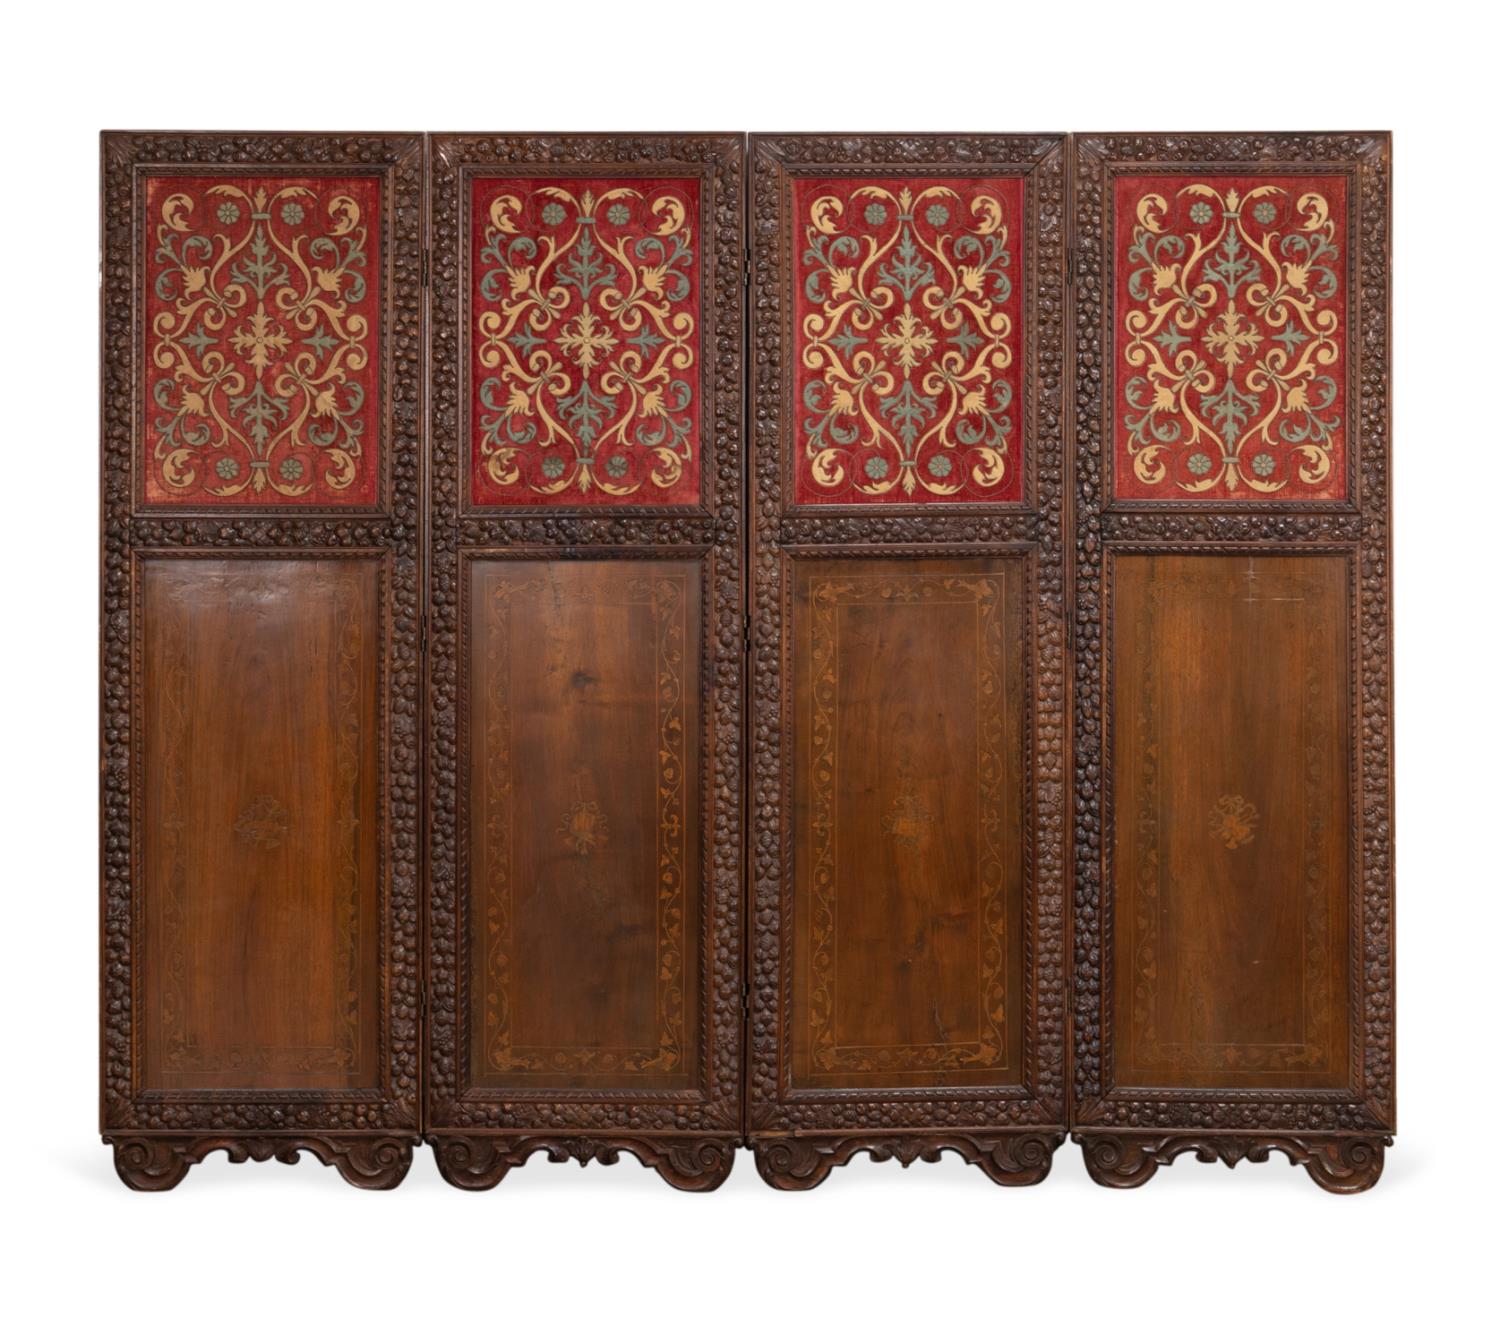 FOUR PANEL CARVED WOOD MARQUETRY 3cd35a